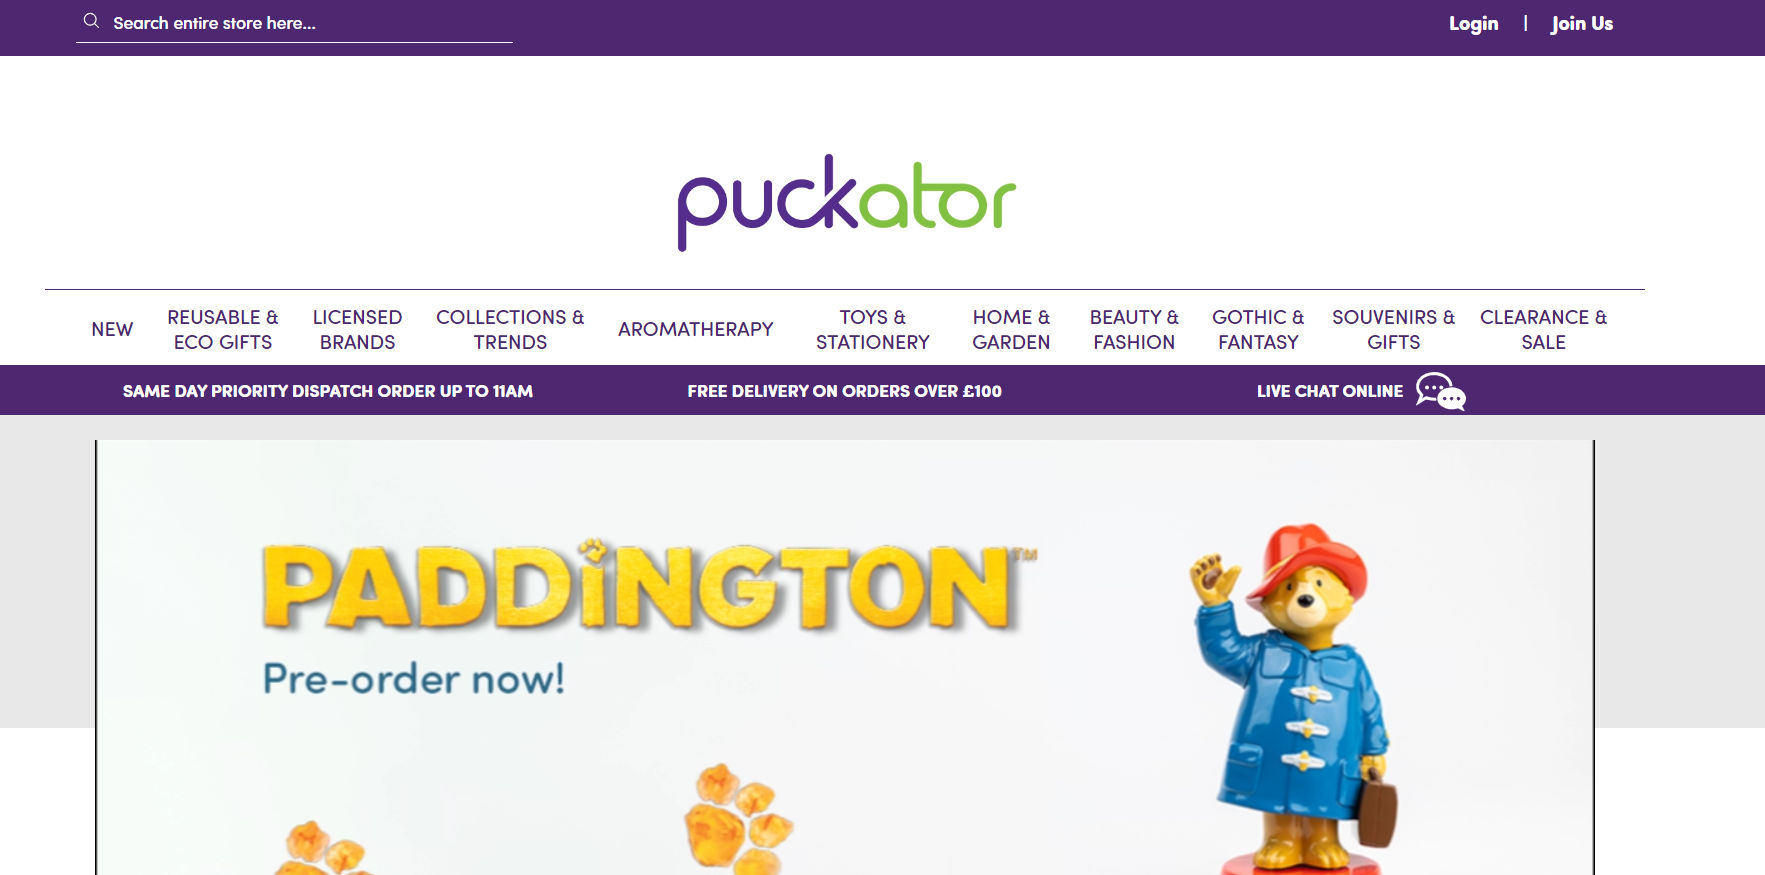 Puckator has been a staple in the UK dropshipping industry since 1990. They started with arts and crafts and have since expanded to include a variety of gift items such as toys, games, home and garden products, beauty, fashion, and souvenirs. 